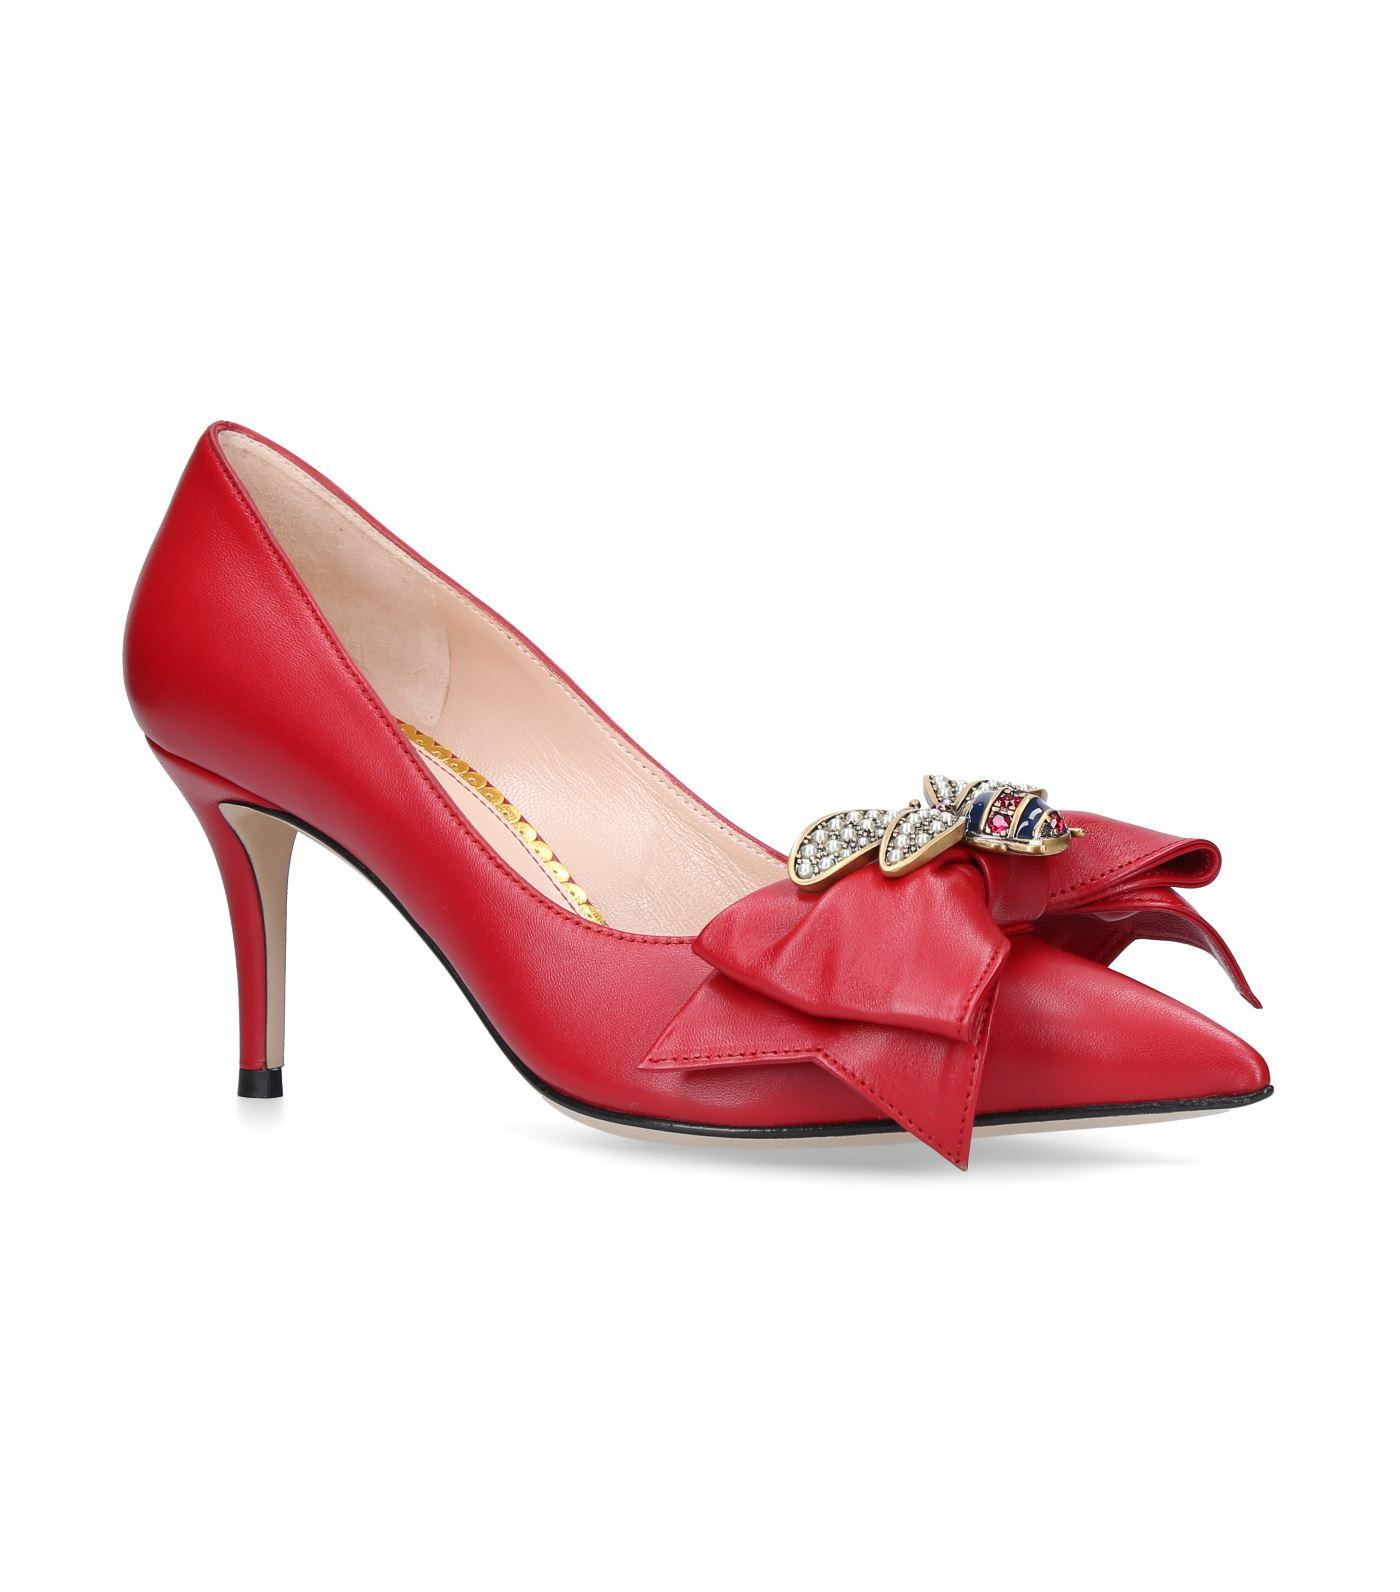 Gucci Queen Margaret Red Leather Pumps 